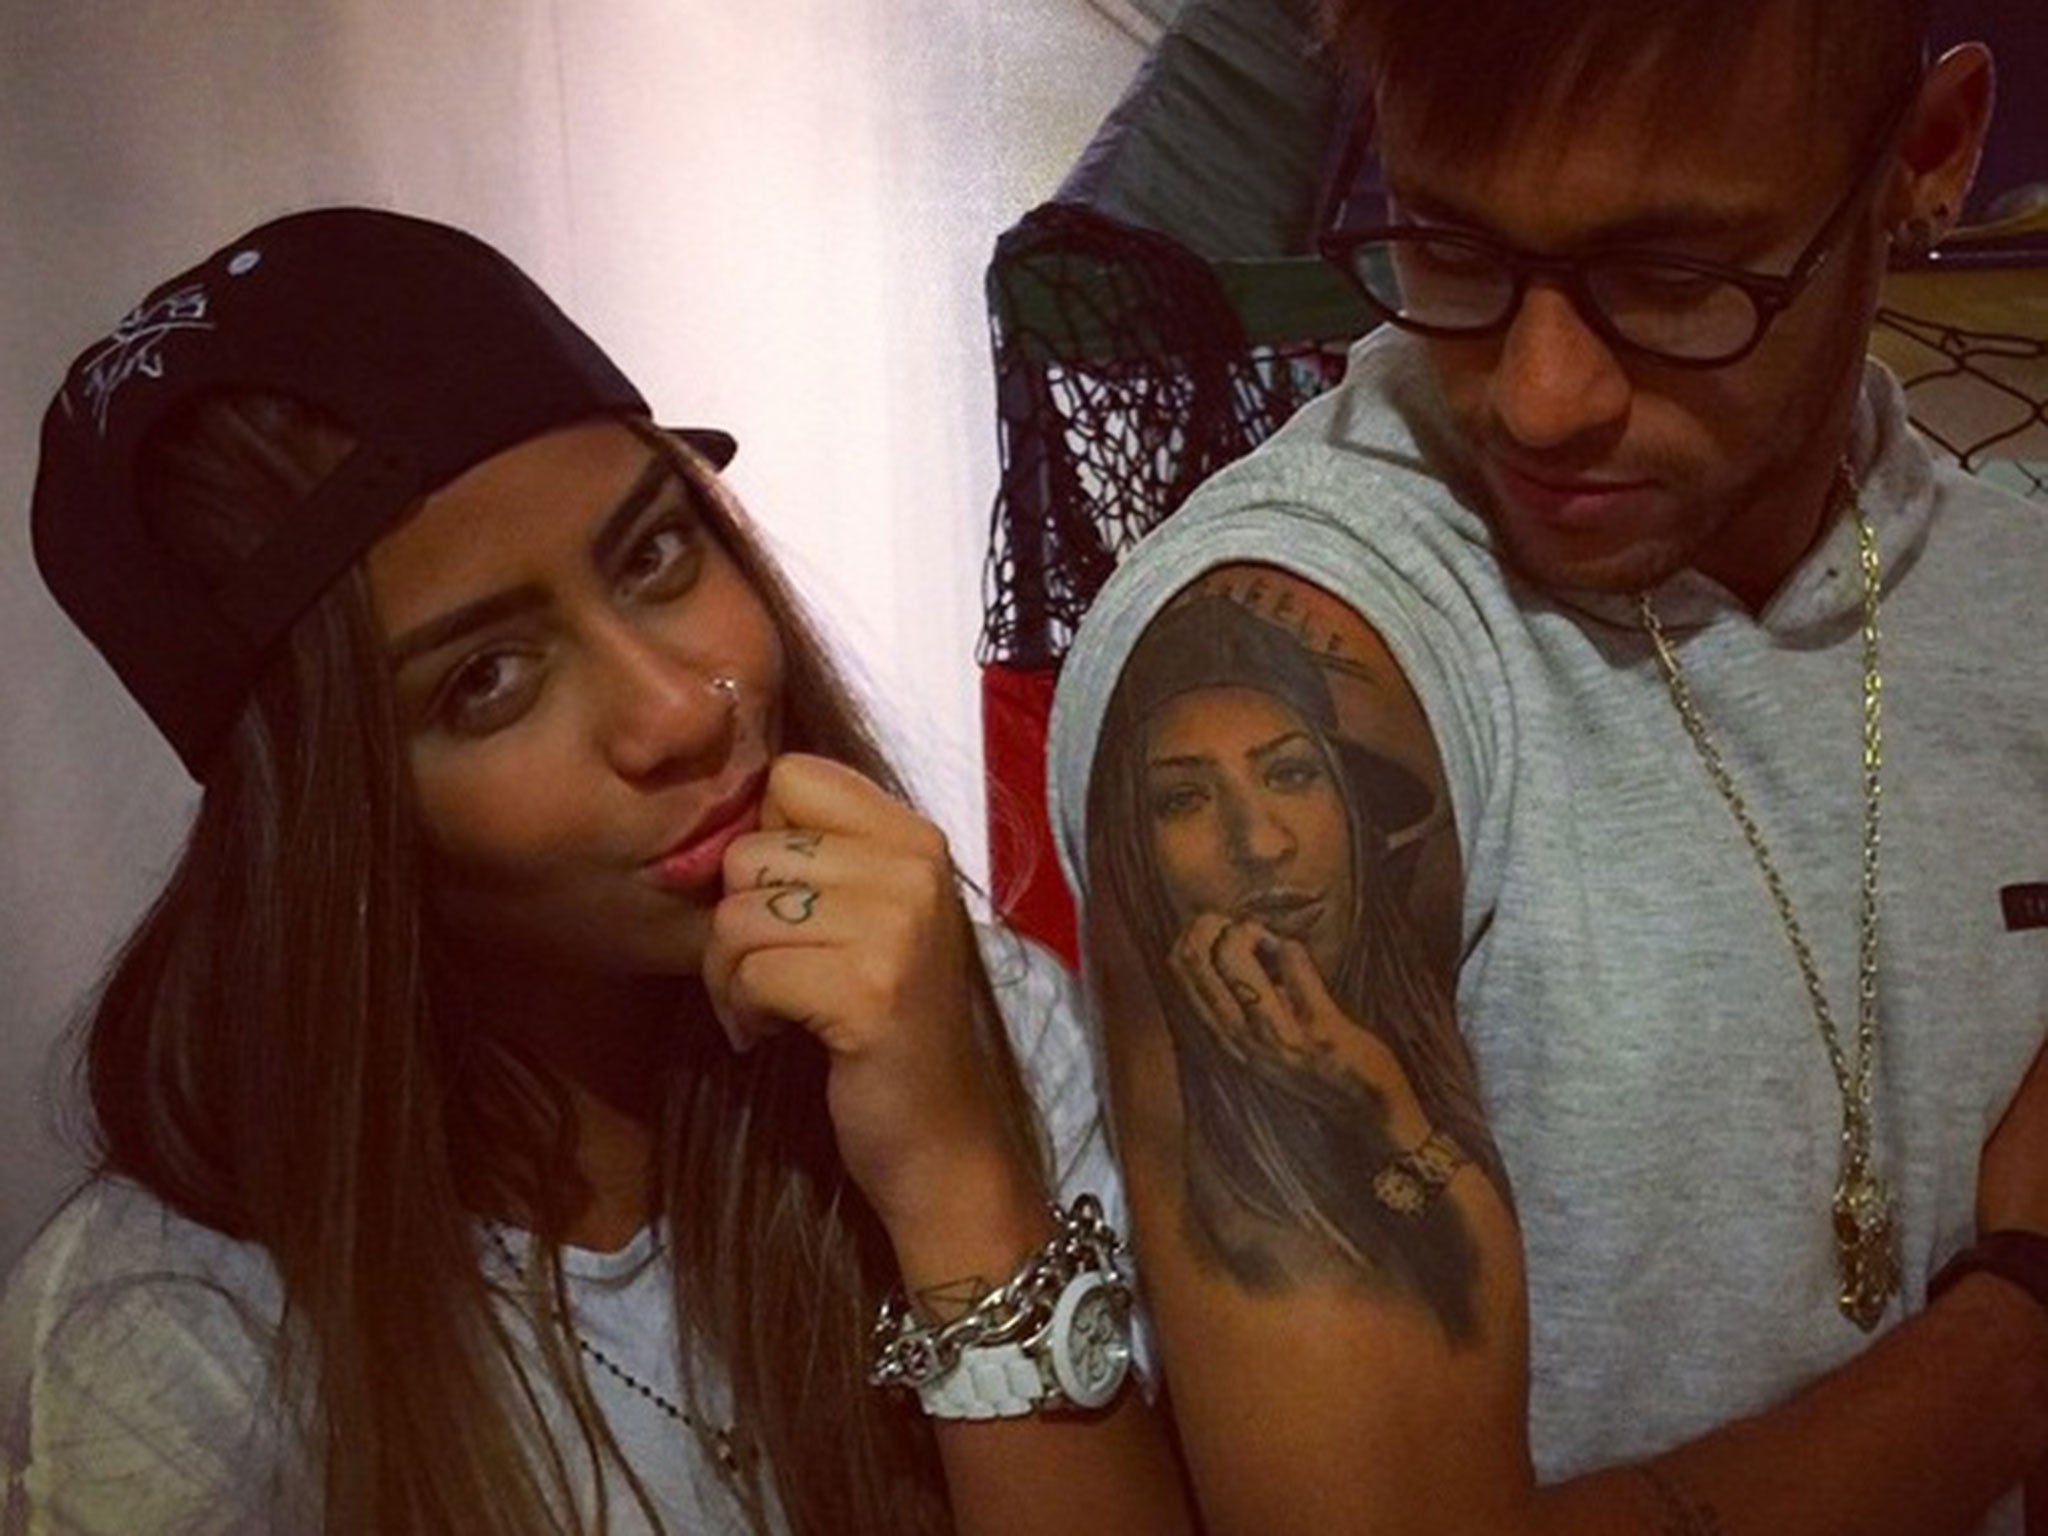 Neymar posted this picture showing his new tattoo with his sister to his Instagram page